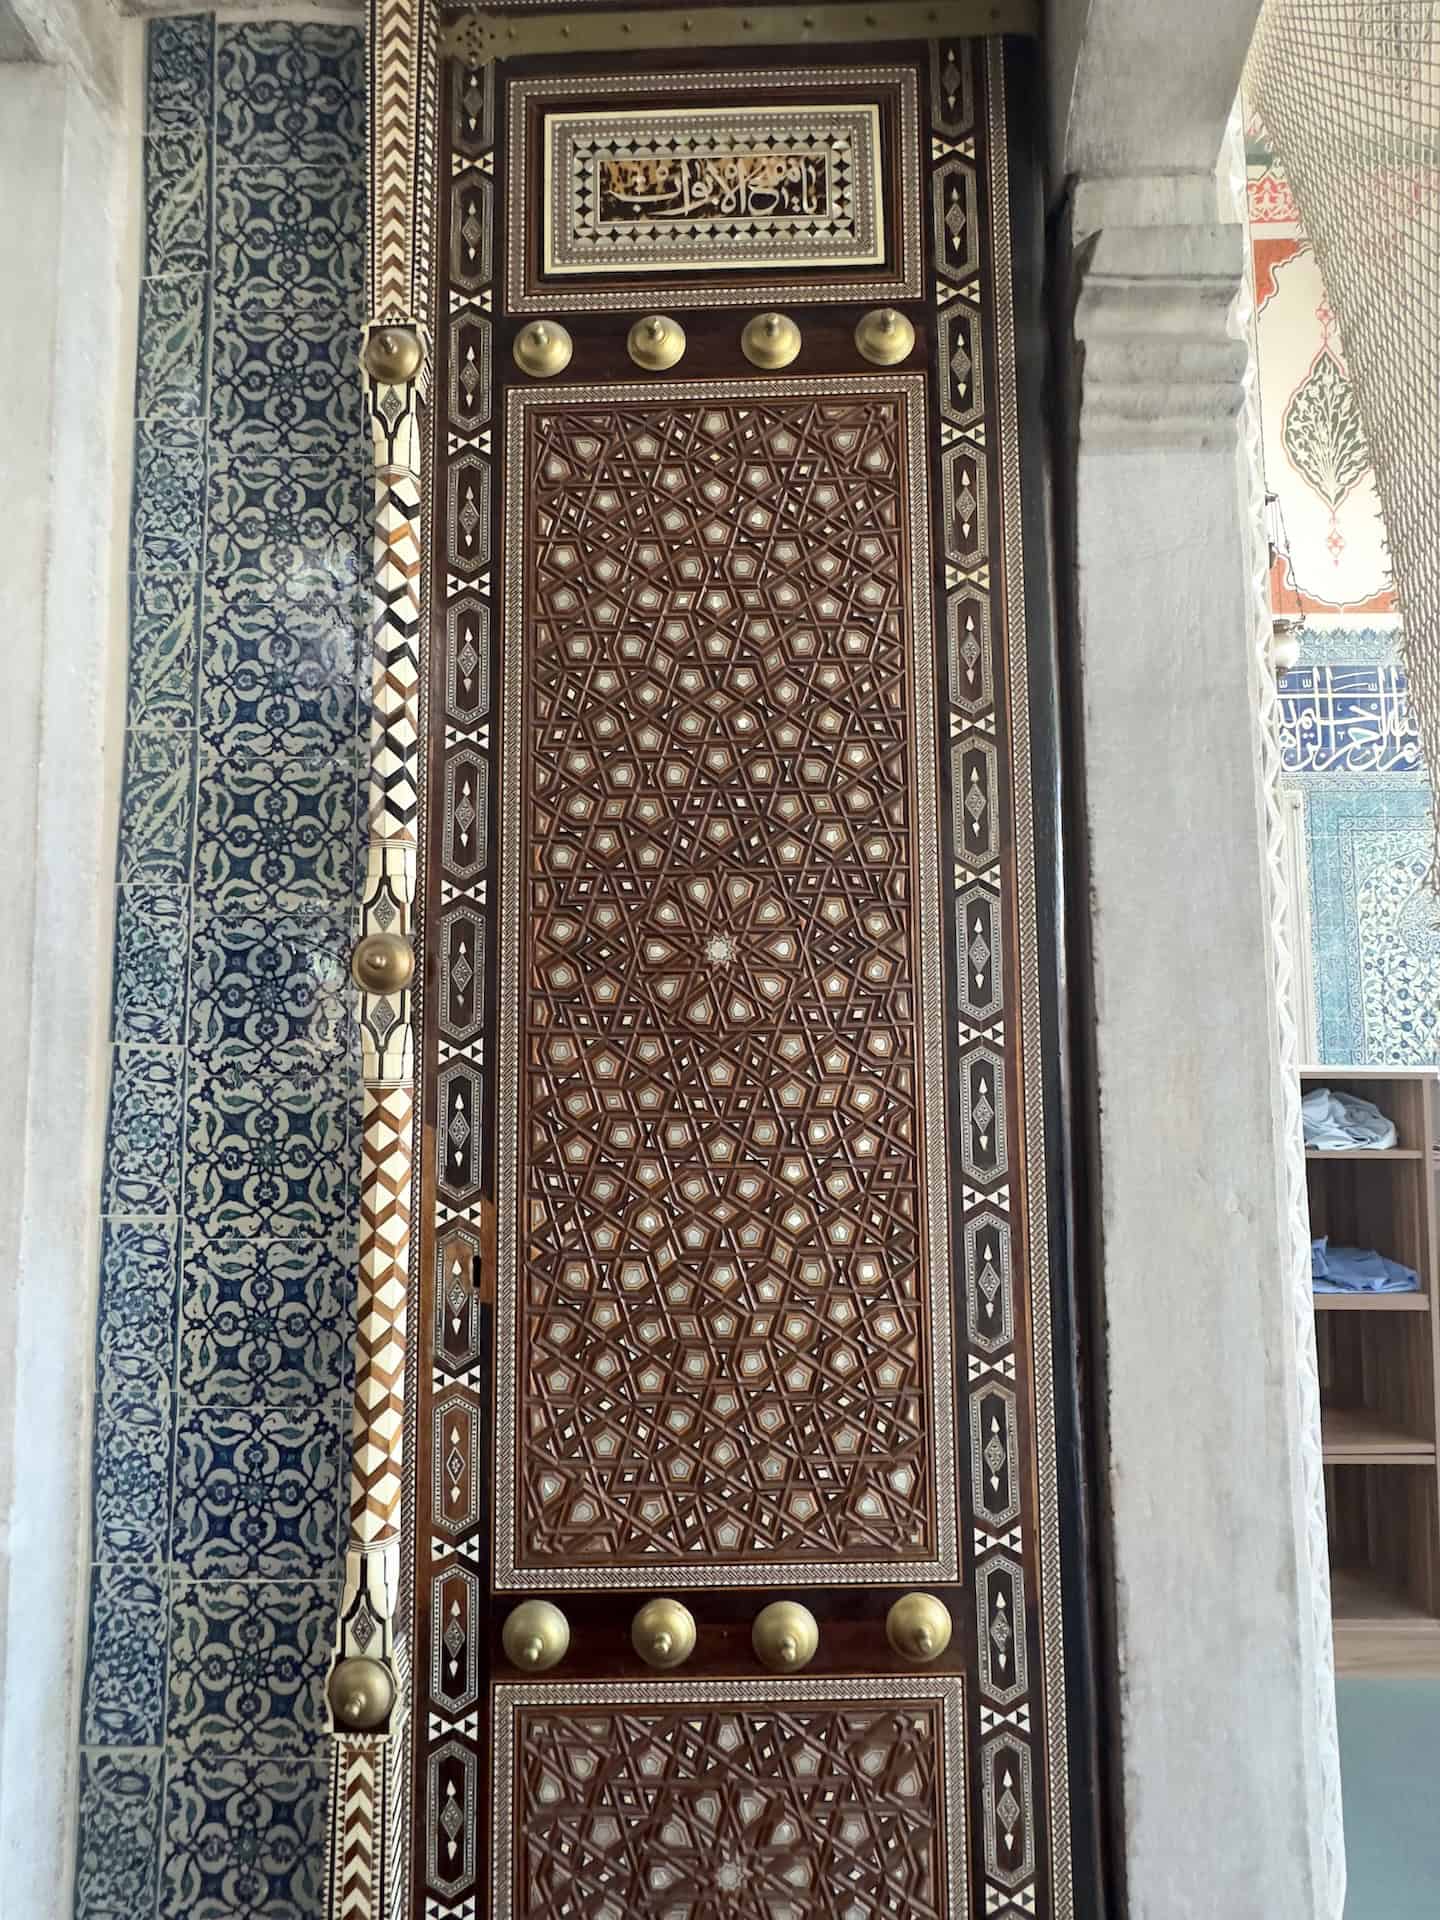 Inlaid mother-of-pearl at the Tomb of Turhan Hatice Sultan